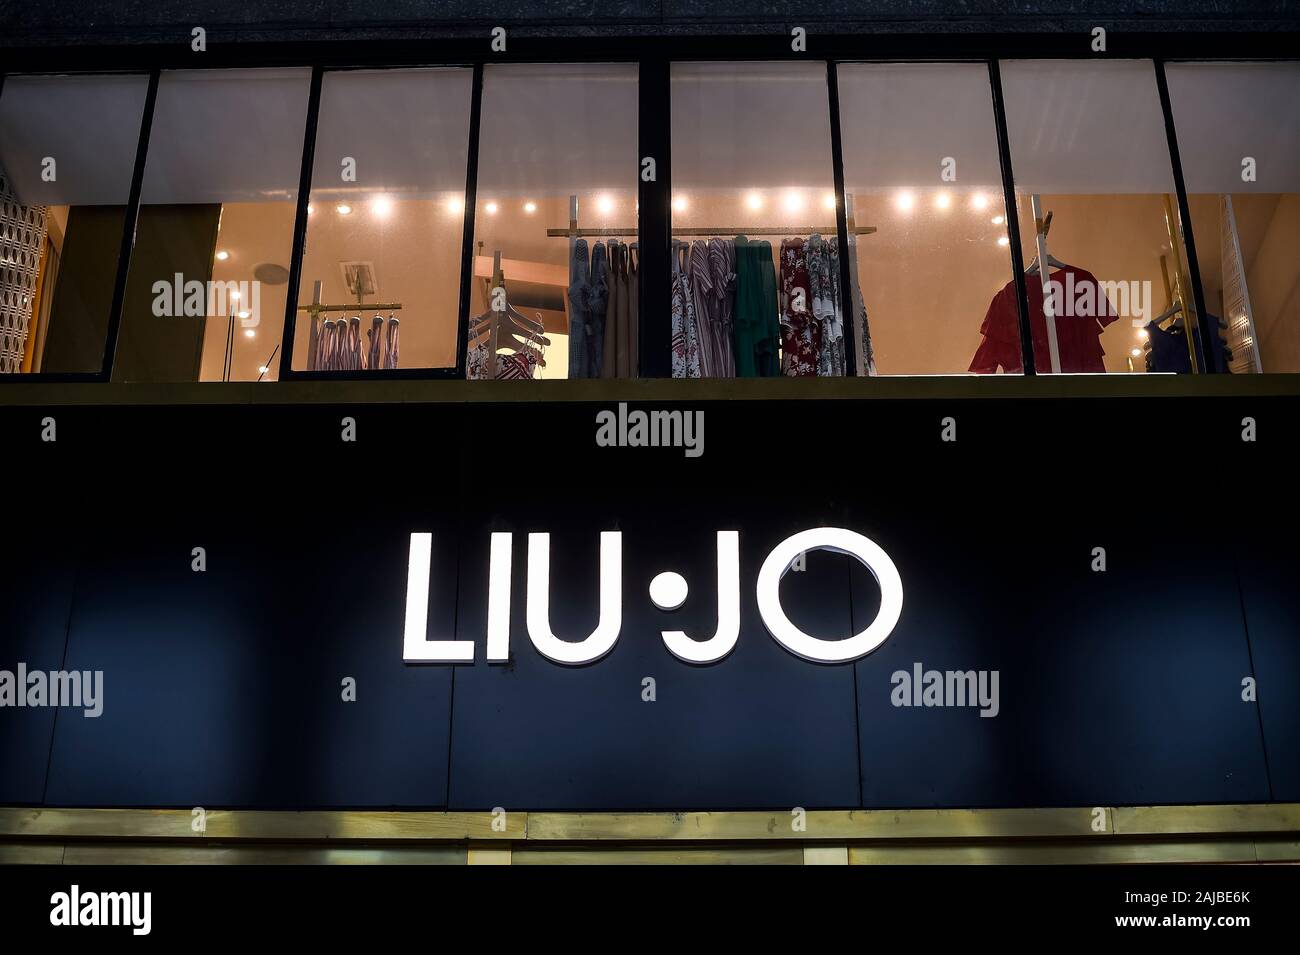 Turin, Italy - 03 July, 2019: Detail of branding outside the Liu Jo store in Turin. Credit: Nicolò Campo/Alamy Live News Stock Photo